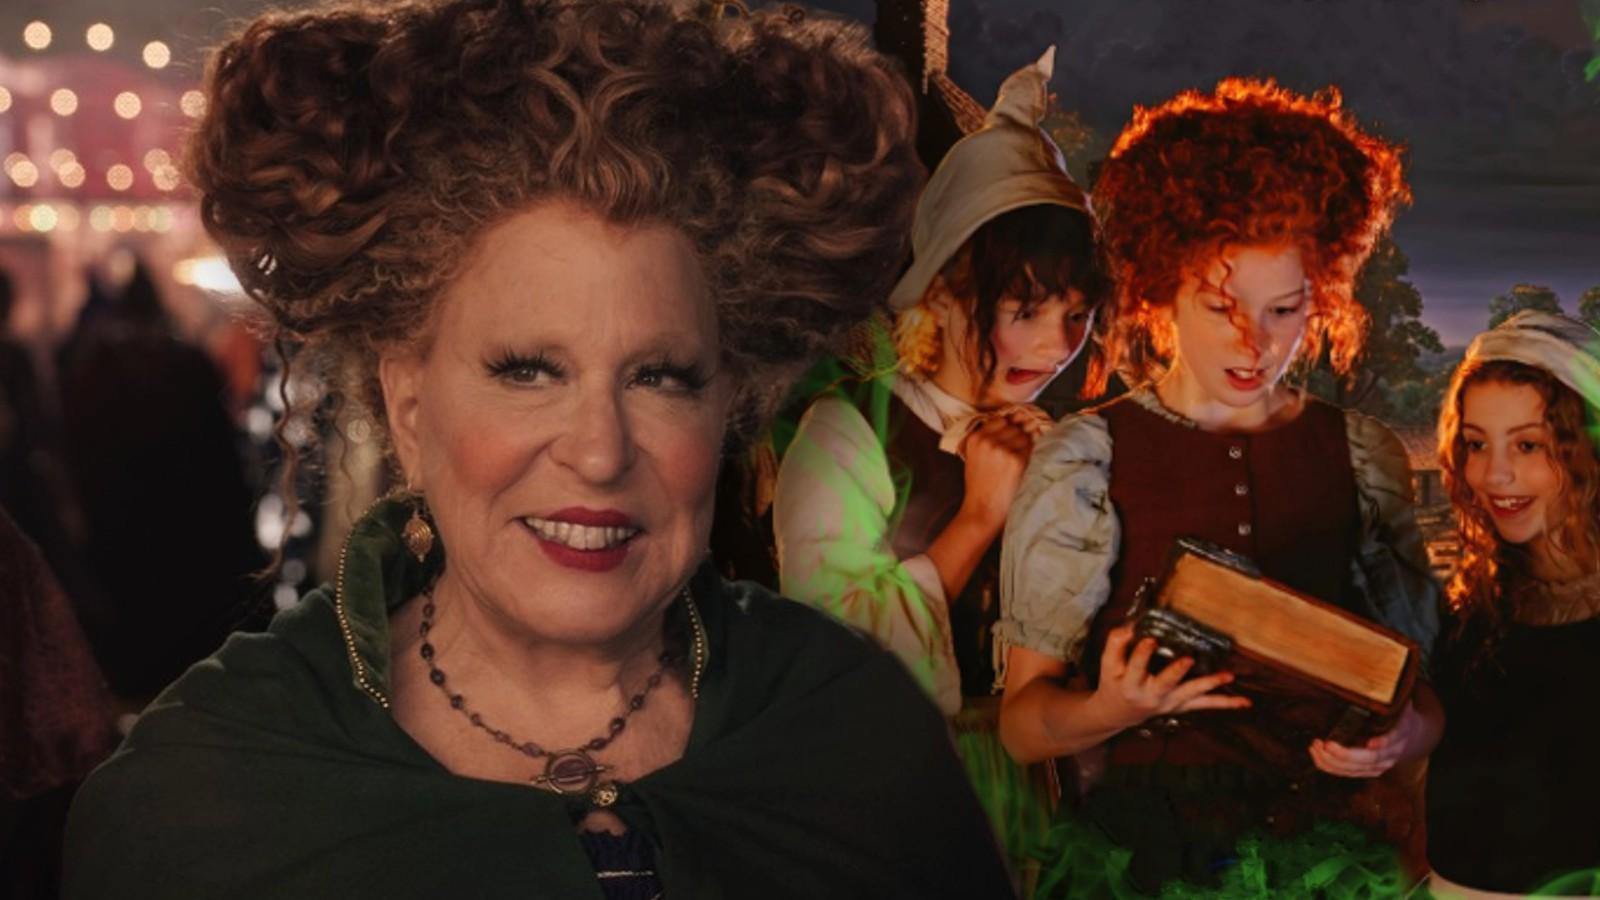 Bette Midler in Hocus Pocus 2 and the fake poster for the prequel